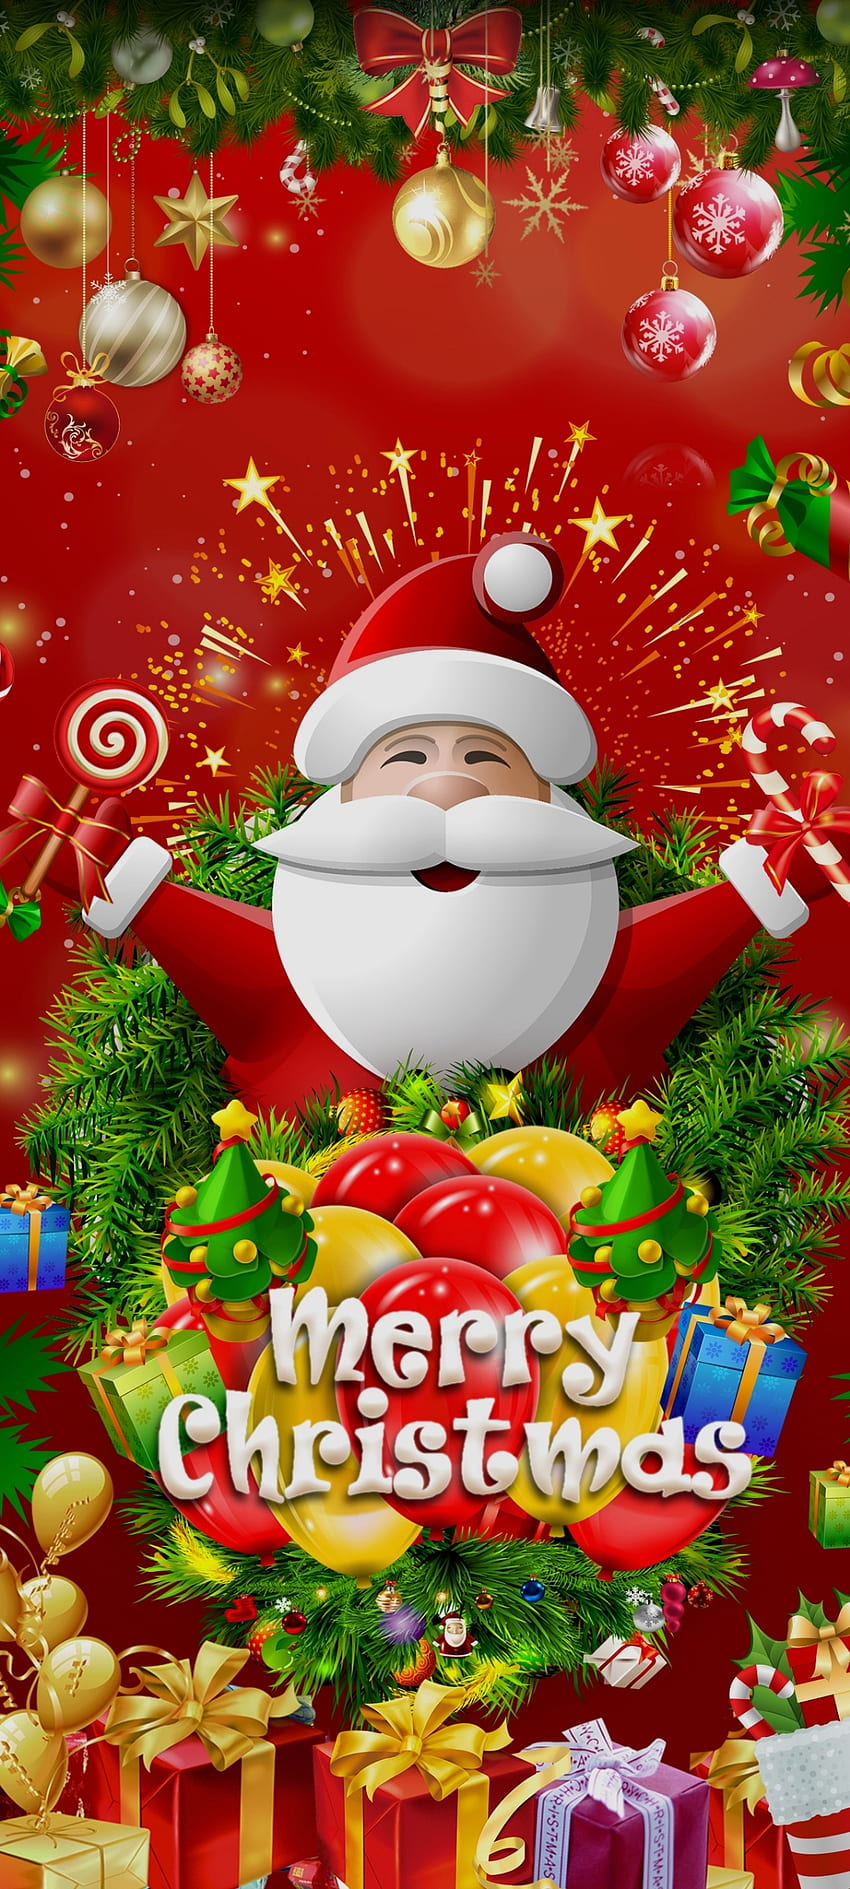 Merry Christmas Candy, gift, holiday ornament, red, Santa, premium, Luxury, festival HD phone wallpaper